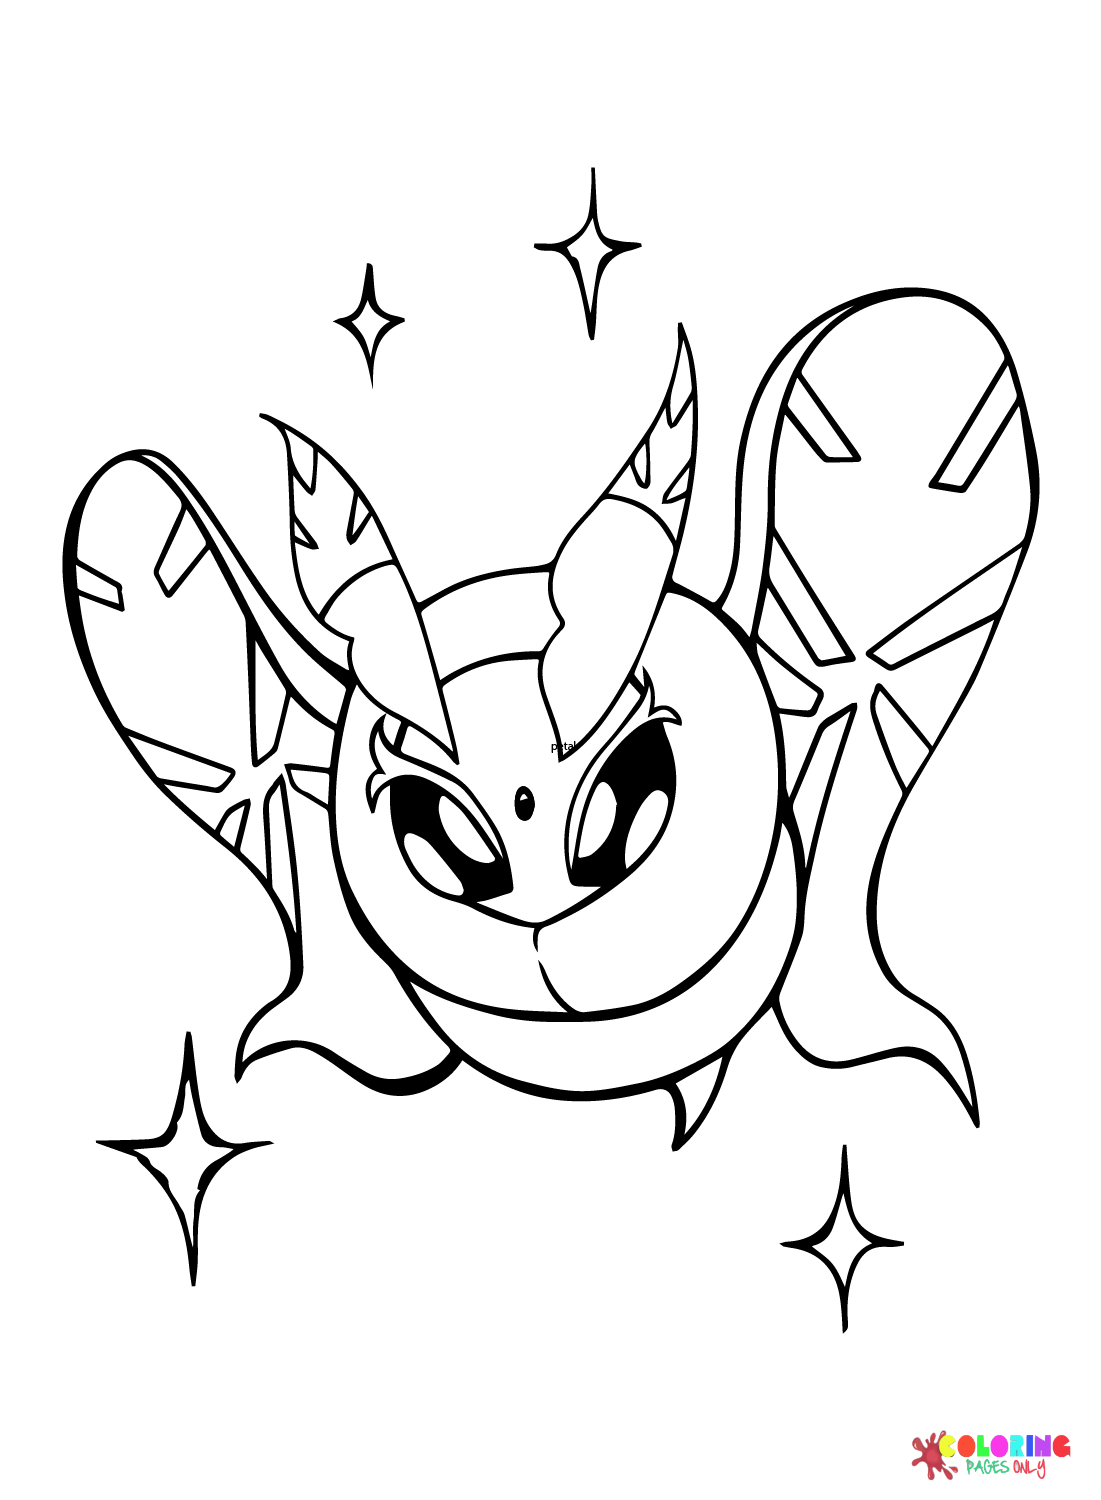 The Frosmoth Pokemon Coloring Page